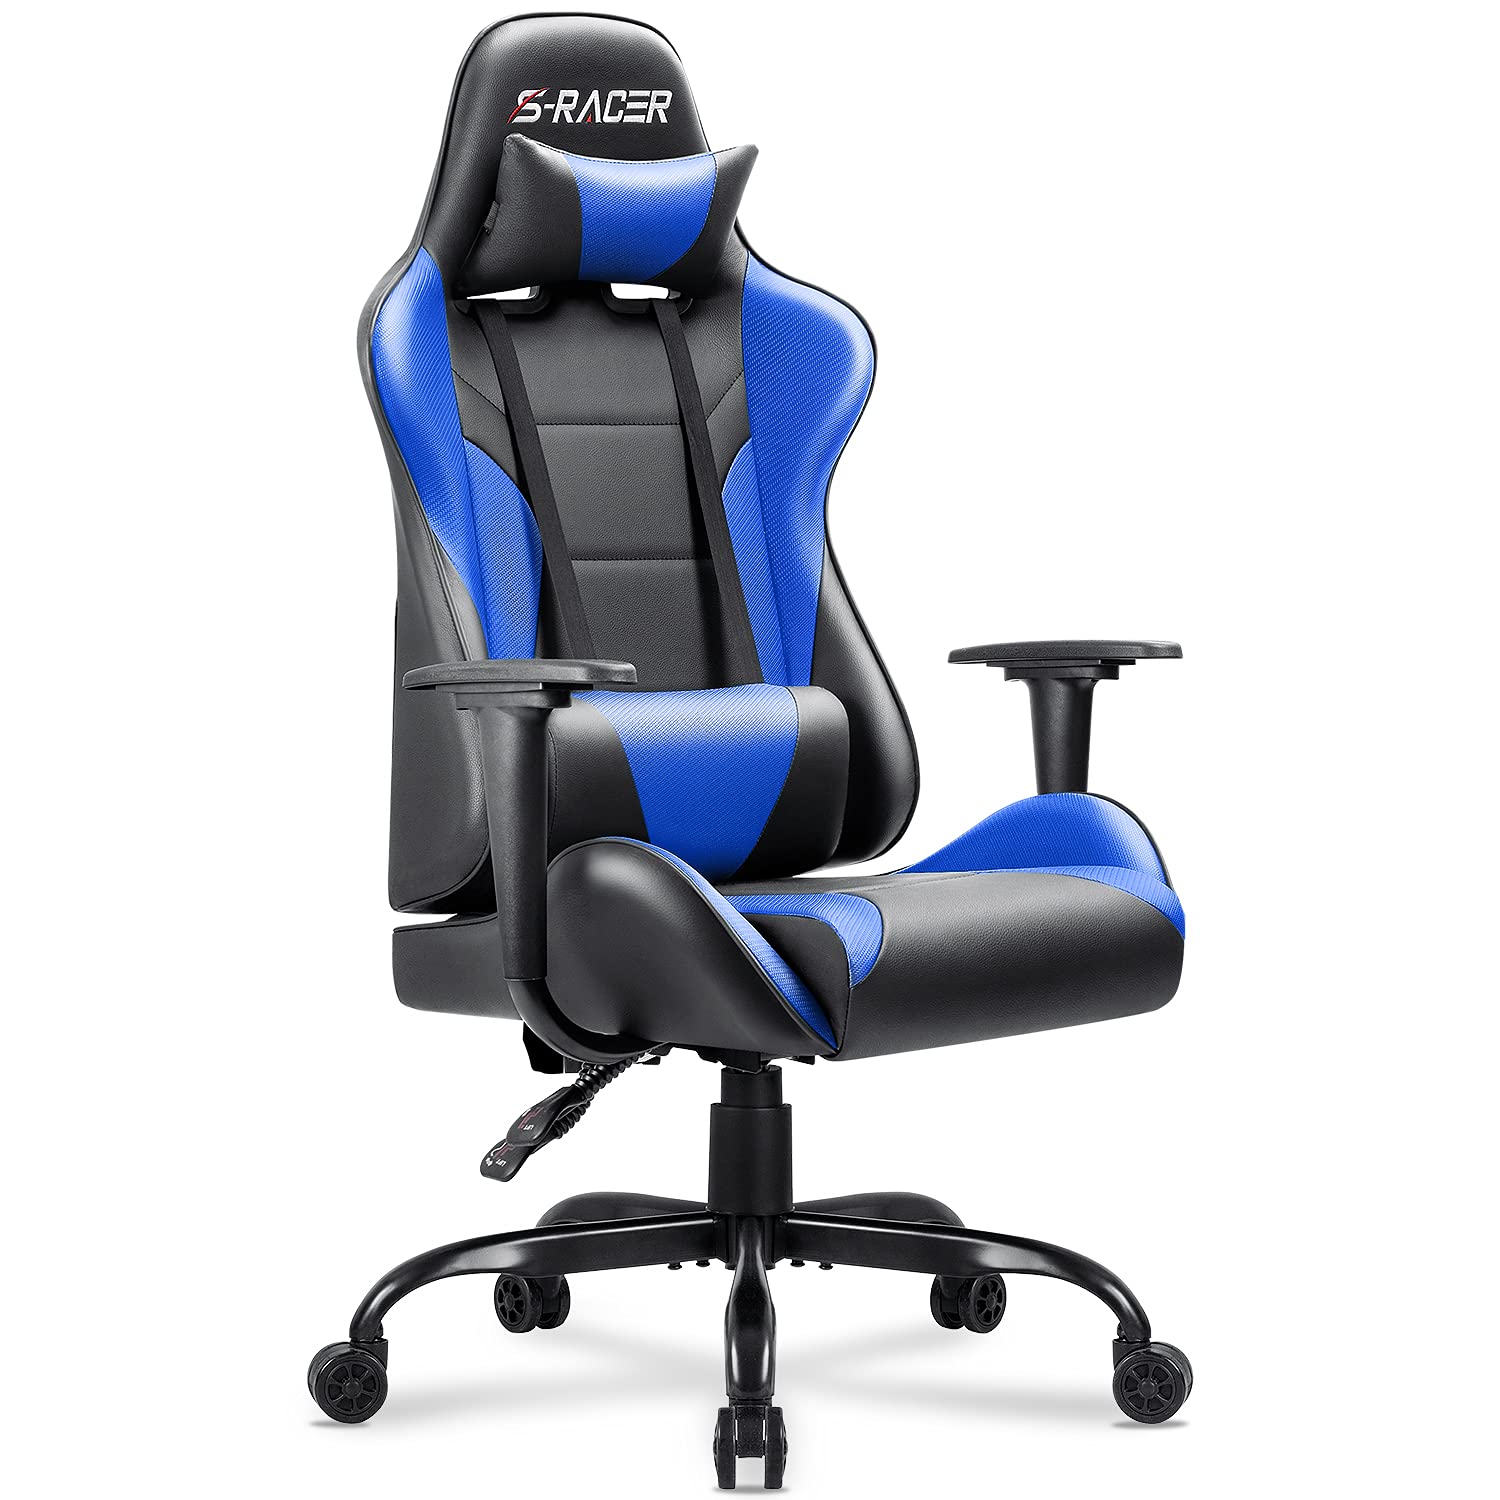 Book Cover Homall Gaming Office Chair Computer Chair High Back Racing Desk Chair PU Leather Adjustable Seat Height Swivel Chair Ergonomic Executive Chair with Headrest for Adults (Blue)